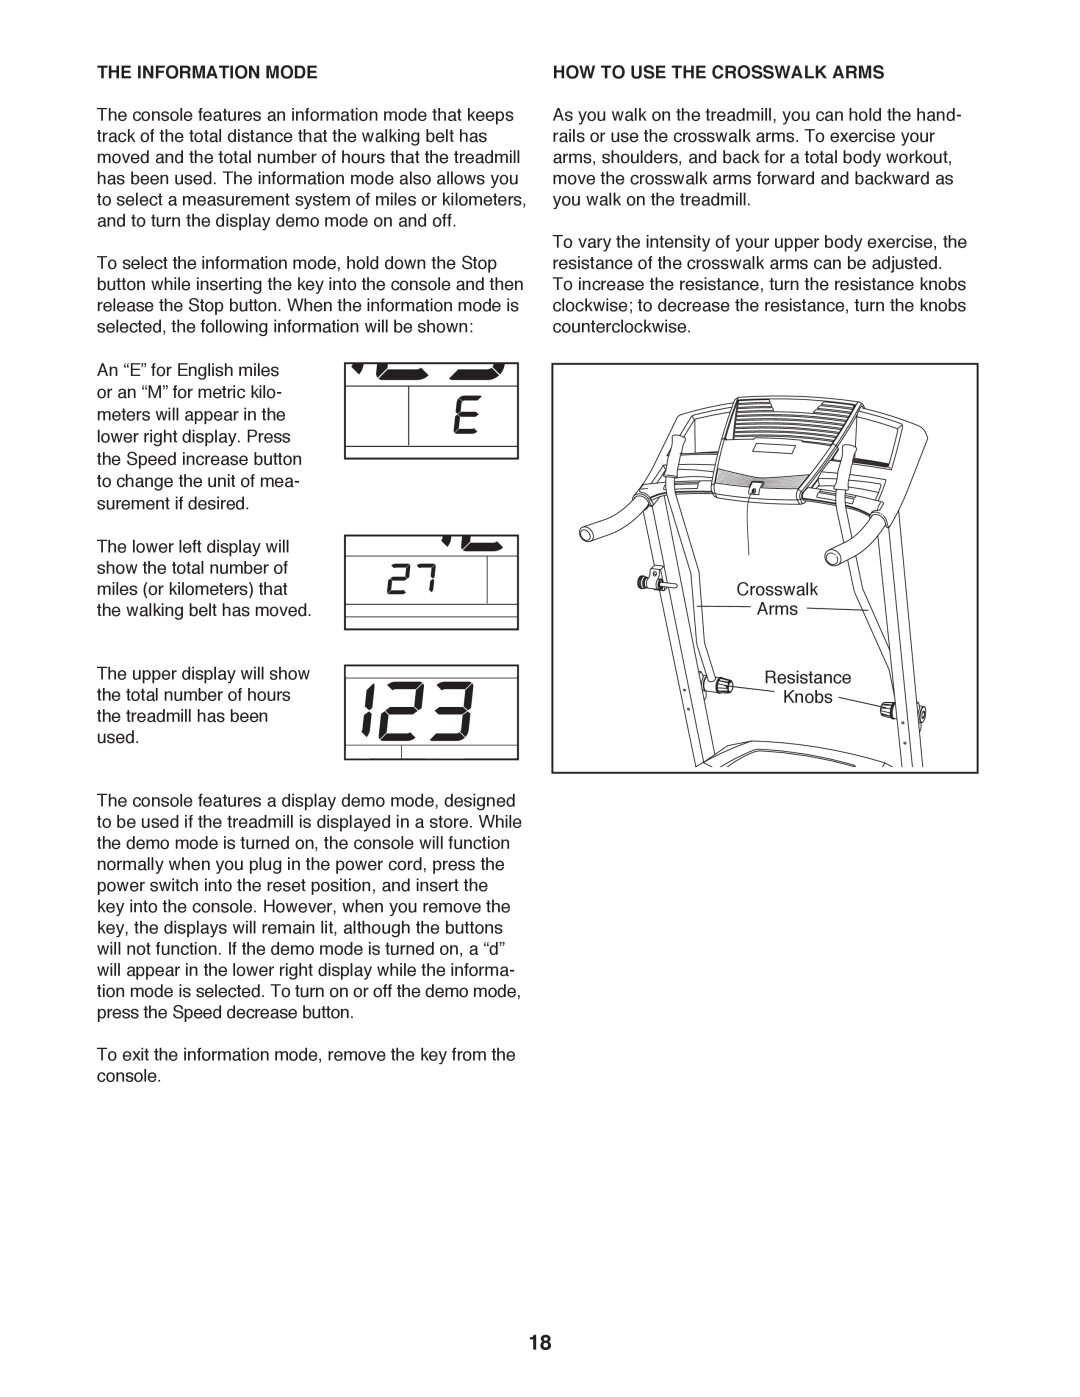 ProForm 397 user manual The Information Mode, How To Use The Crosswalk Arms 